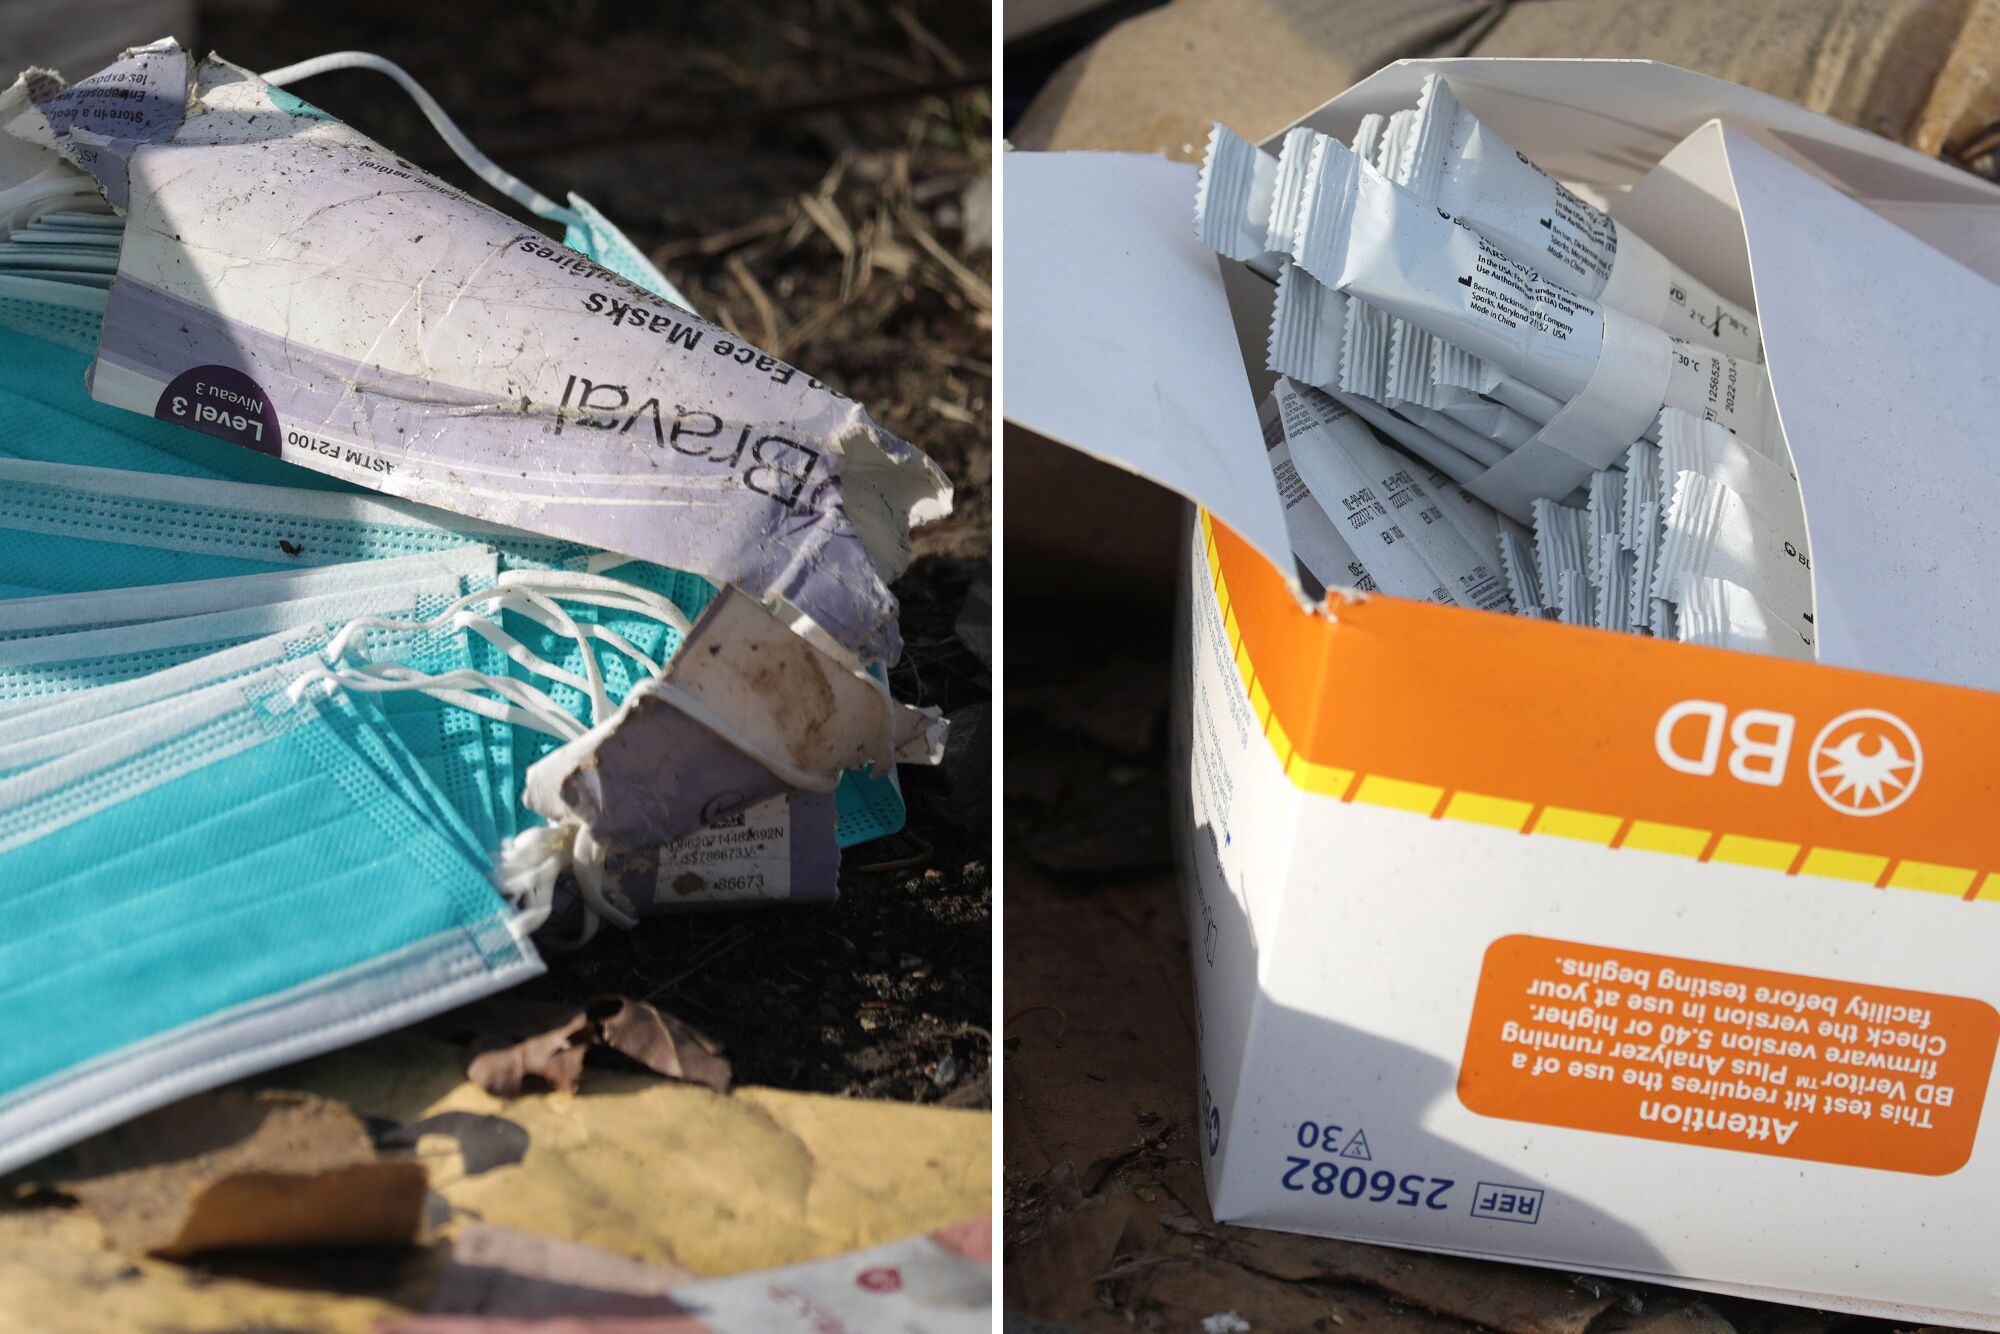 Discarded boxes of face masks and COVID tests.